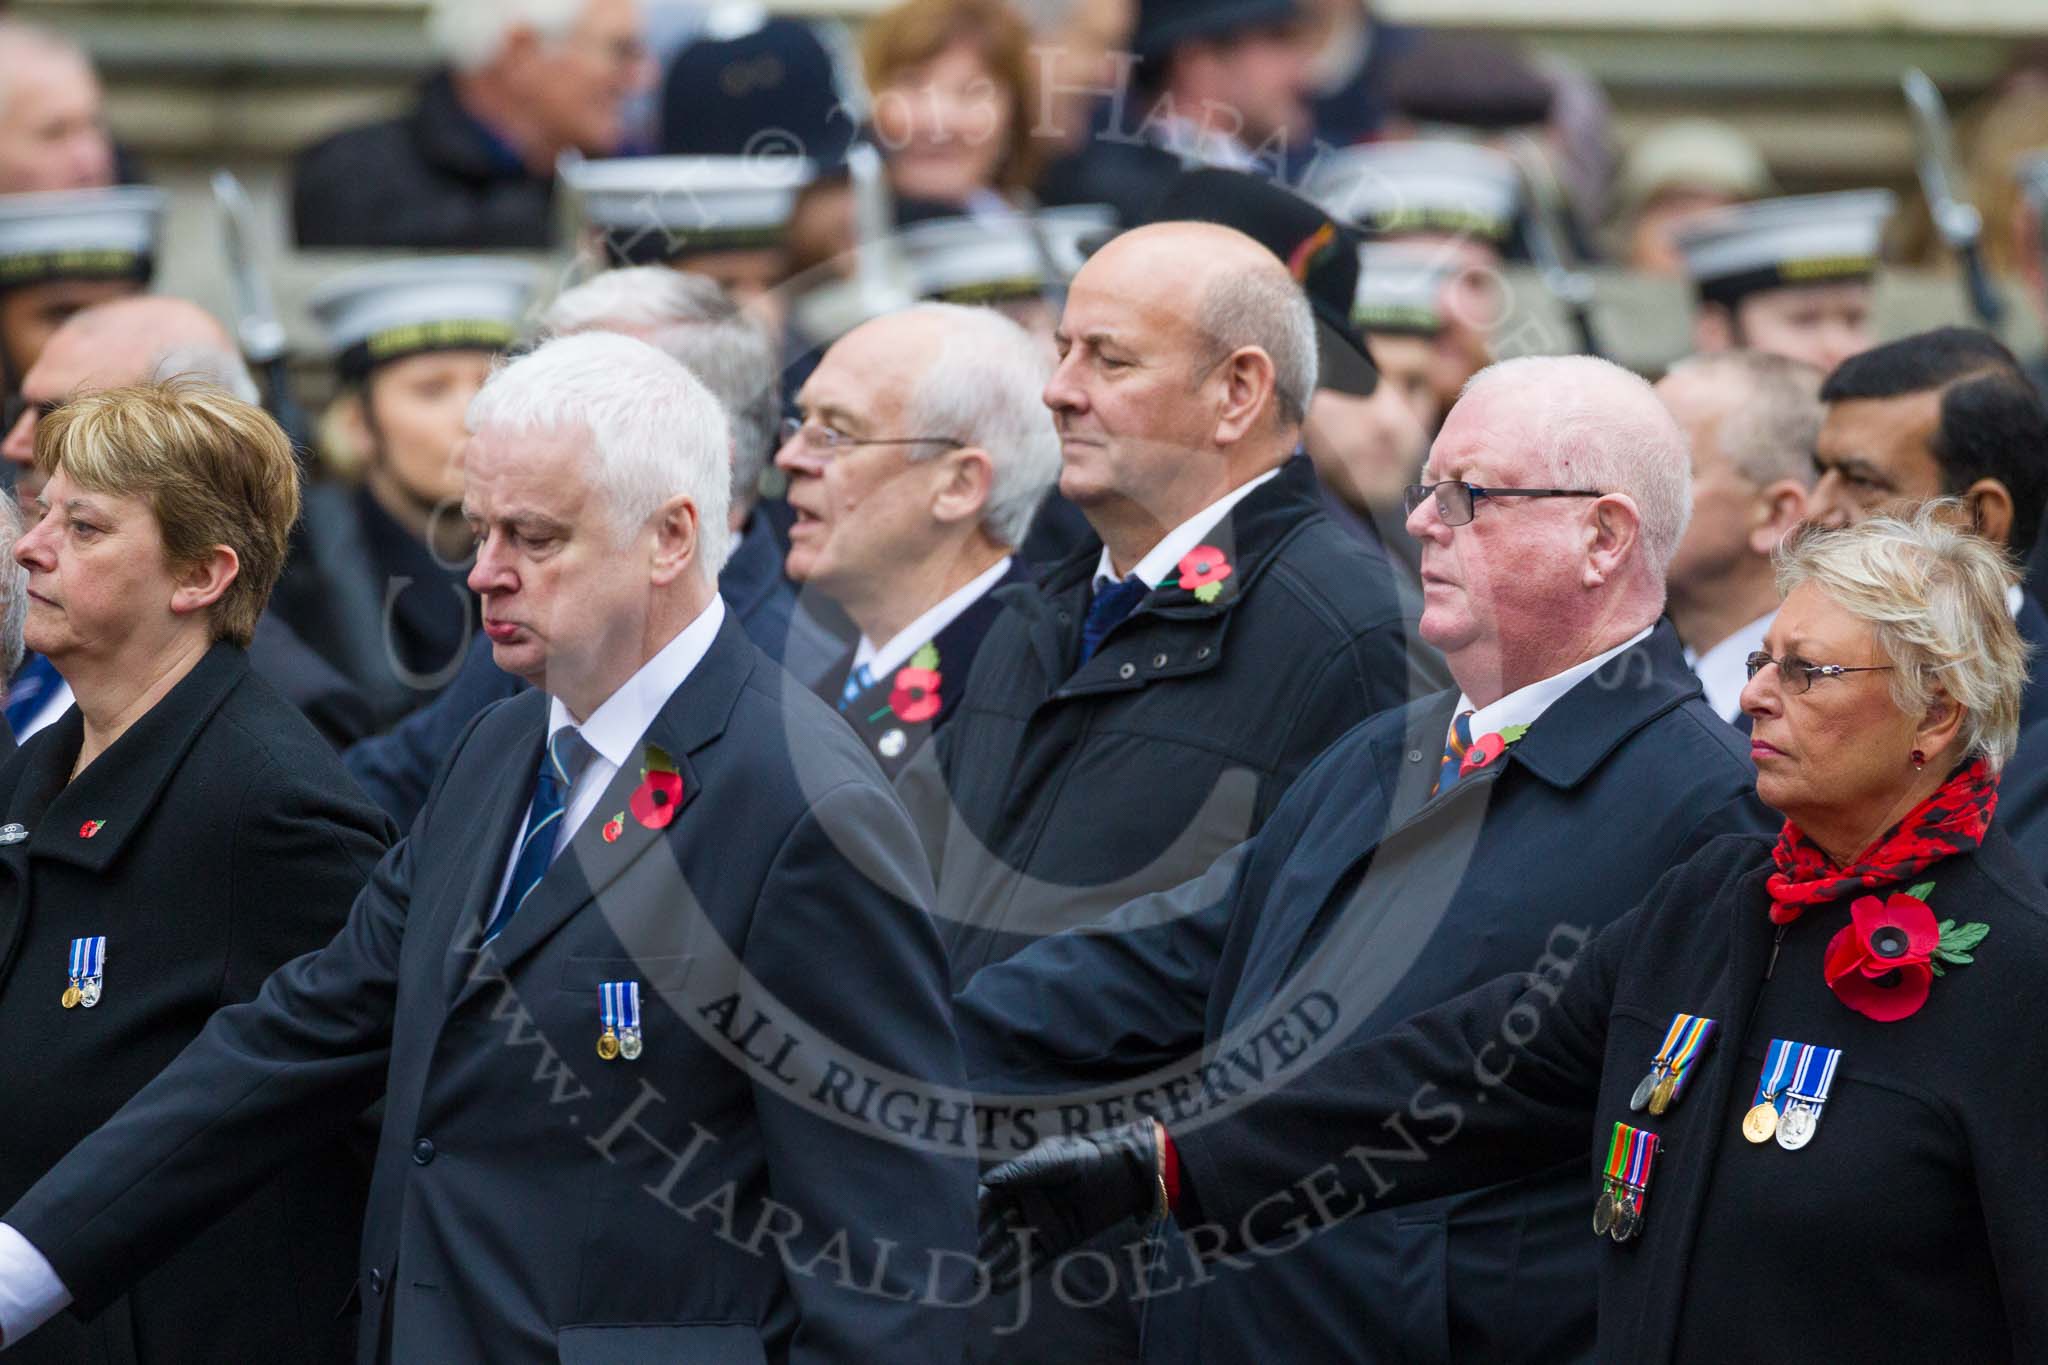 Remembrance Sunday at the Cenotaph 2015: Group M11, National Association of Retired Police Officers.
Cenotaph, Whitehall, London SW1,
London,
Greater London,
United Kingdom,
on 08 November 2015 at 12:15, image #1468